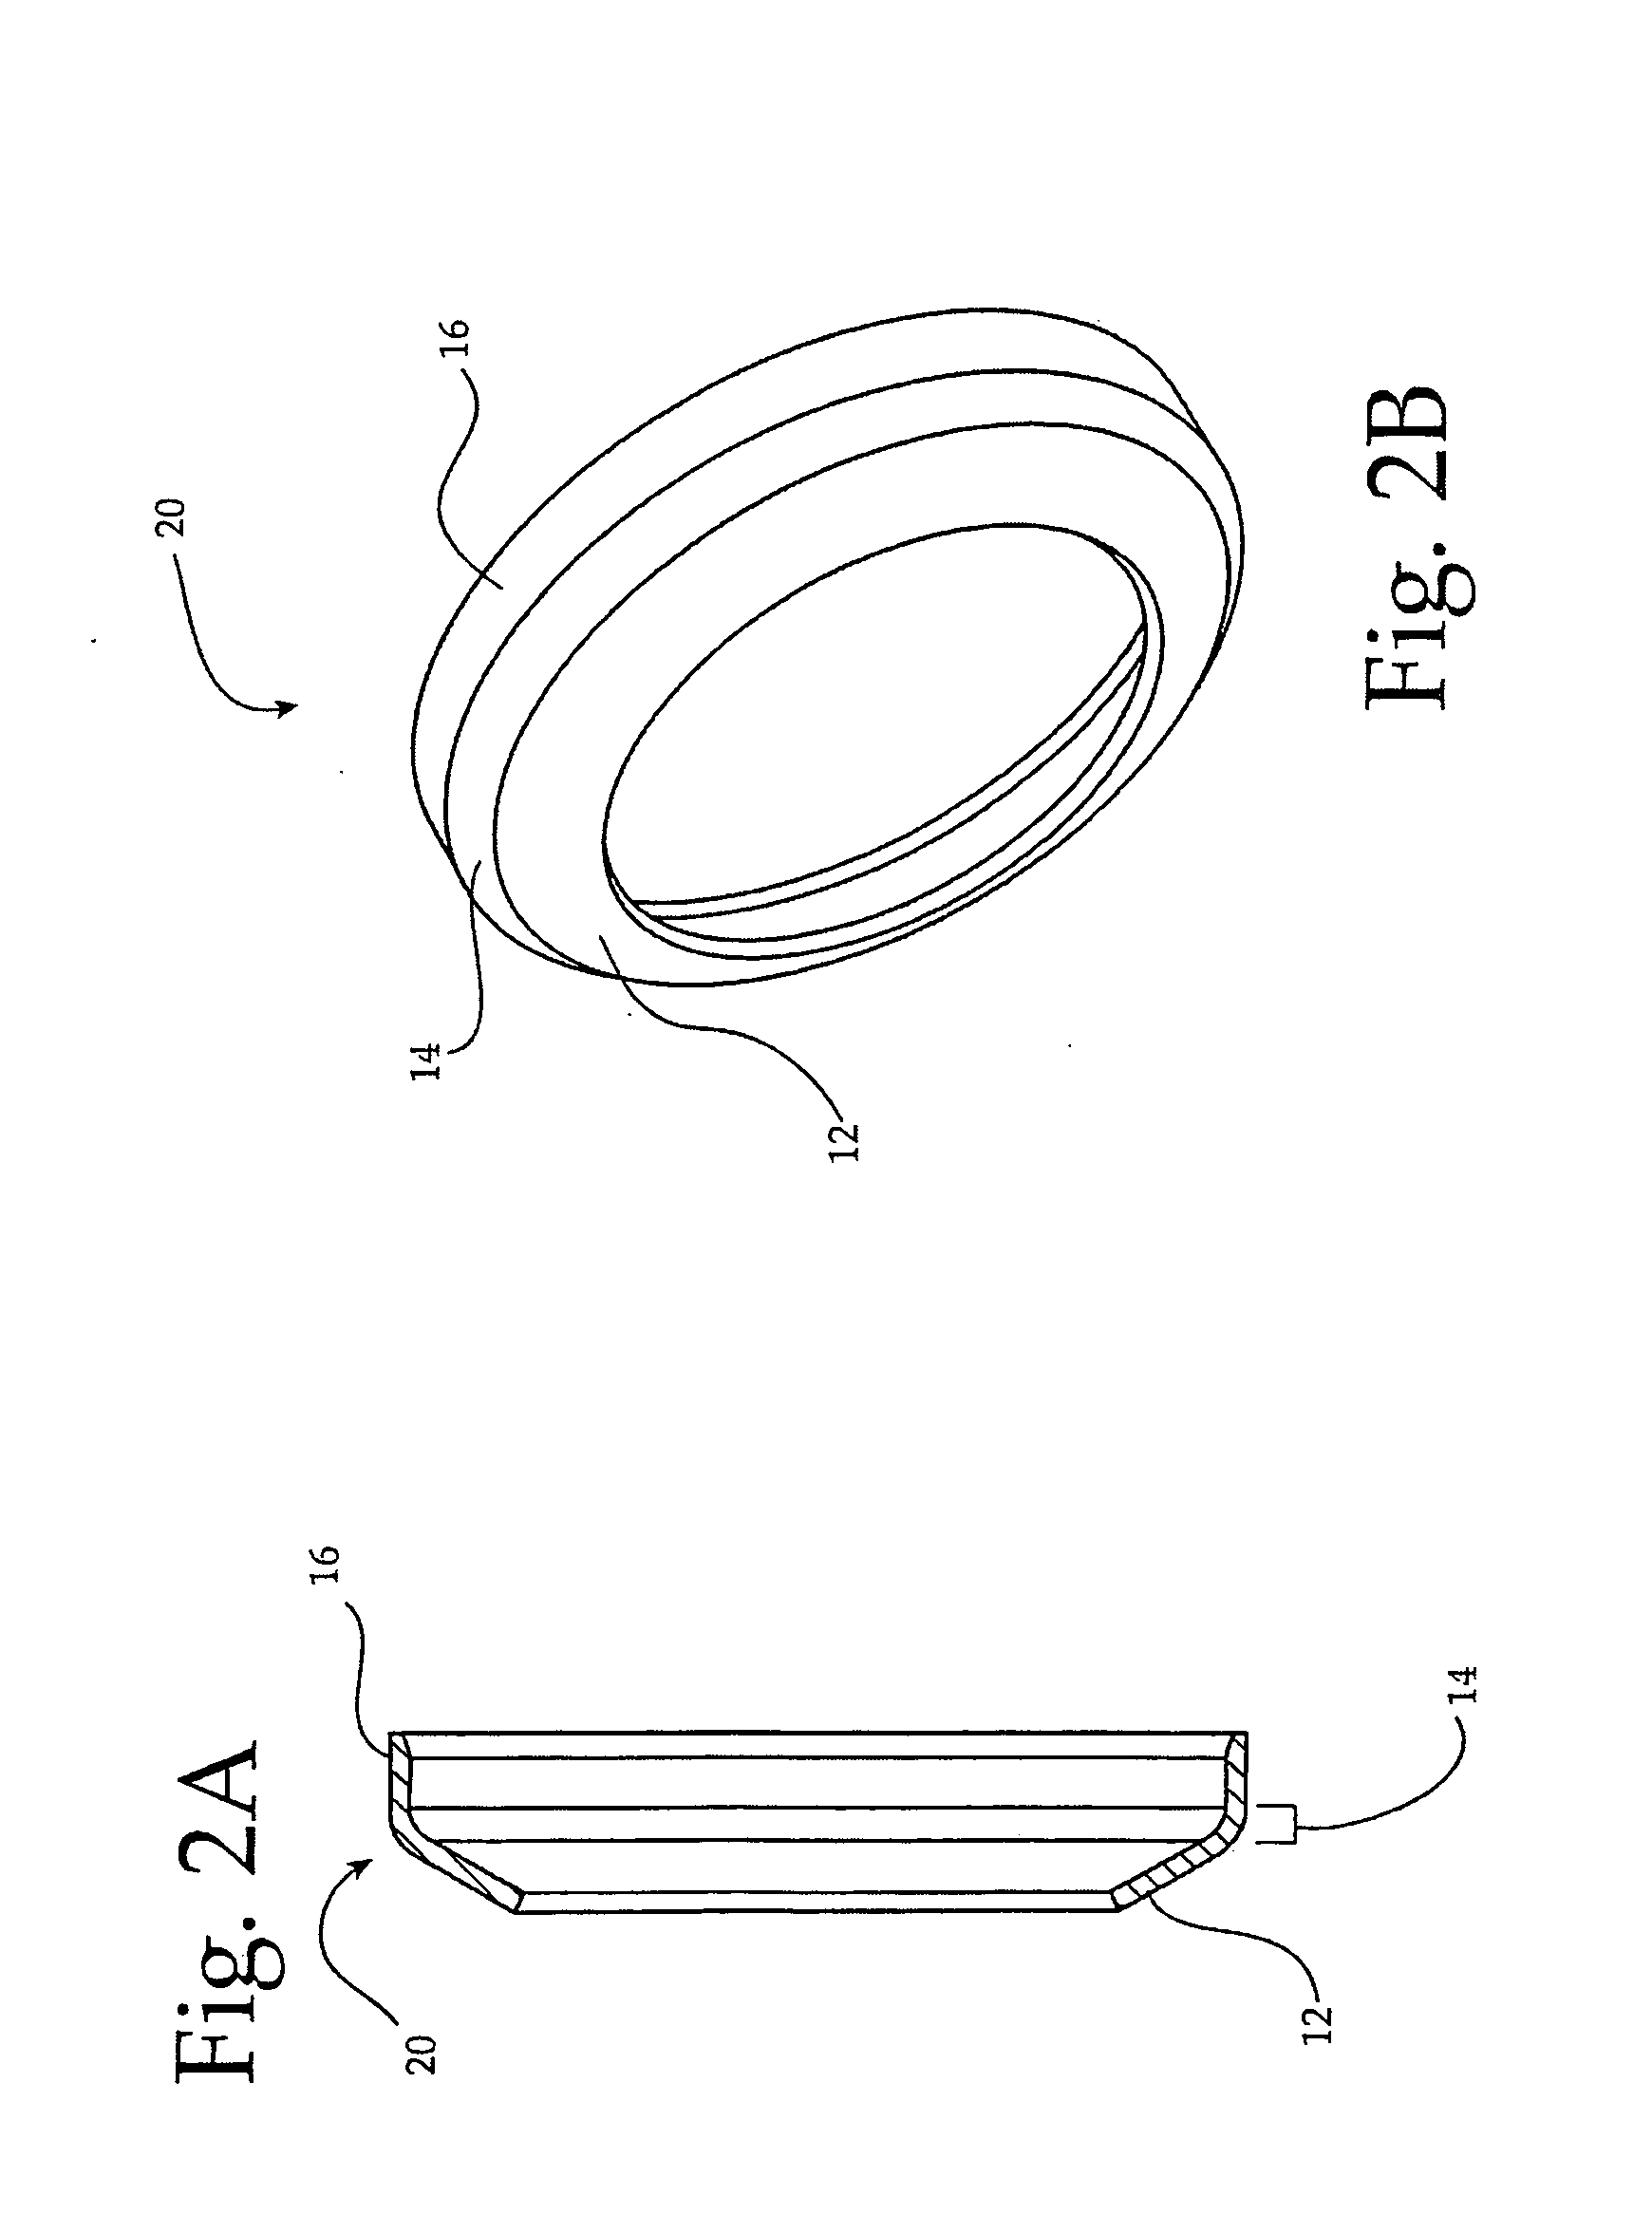 Flexible RF seal for coaxial cable connector